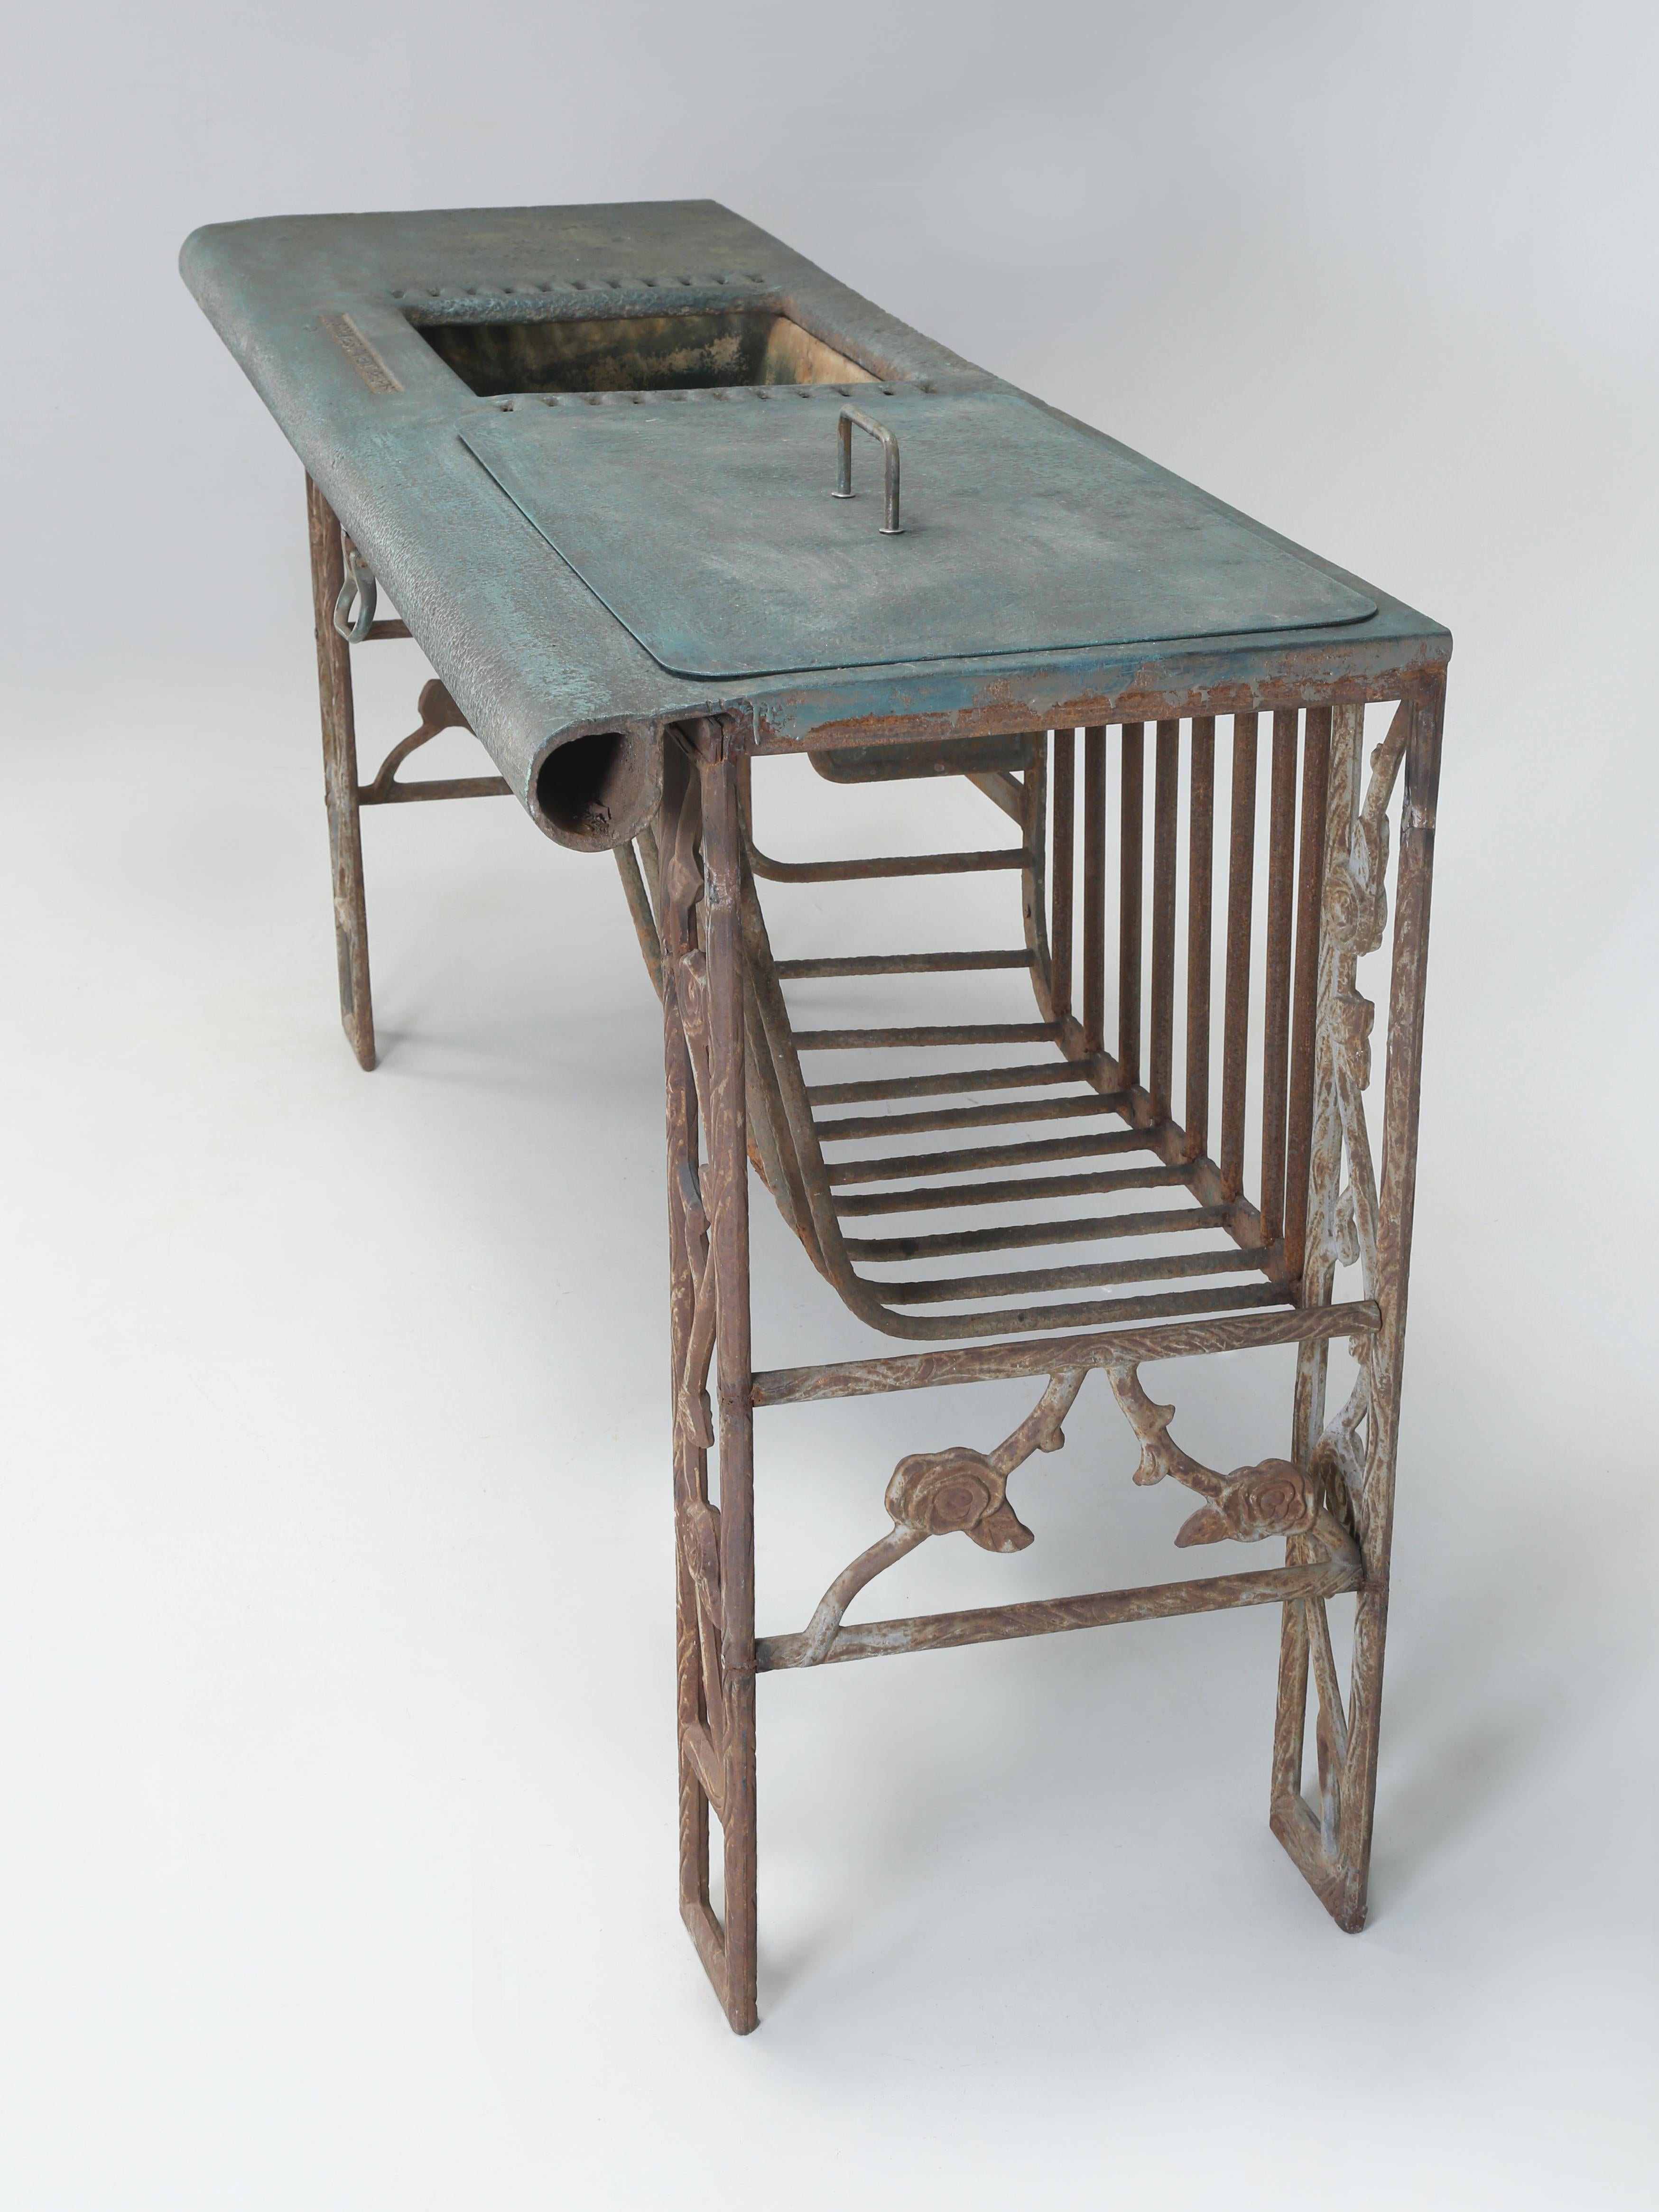 Cast Iron Stable Fitting by Musgrave & Co LTD. Garden Table, Kitchen Island or ? For Sale 1